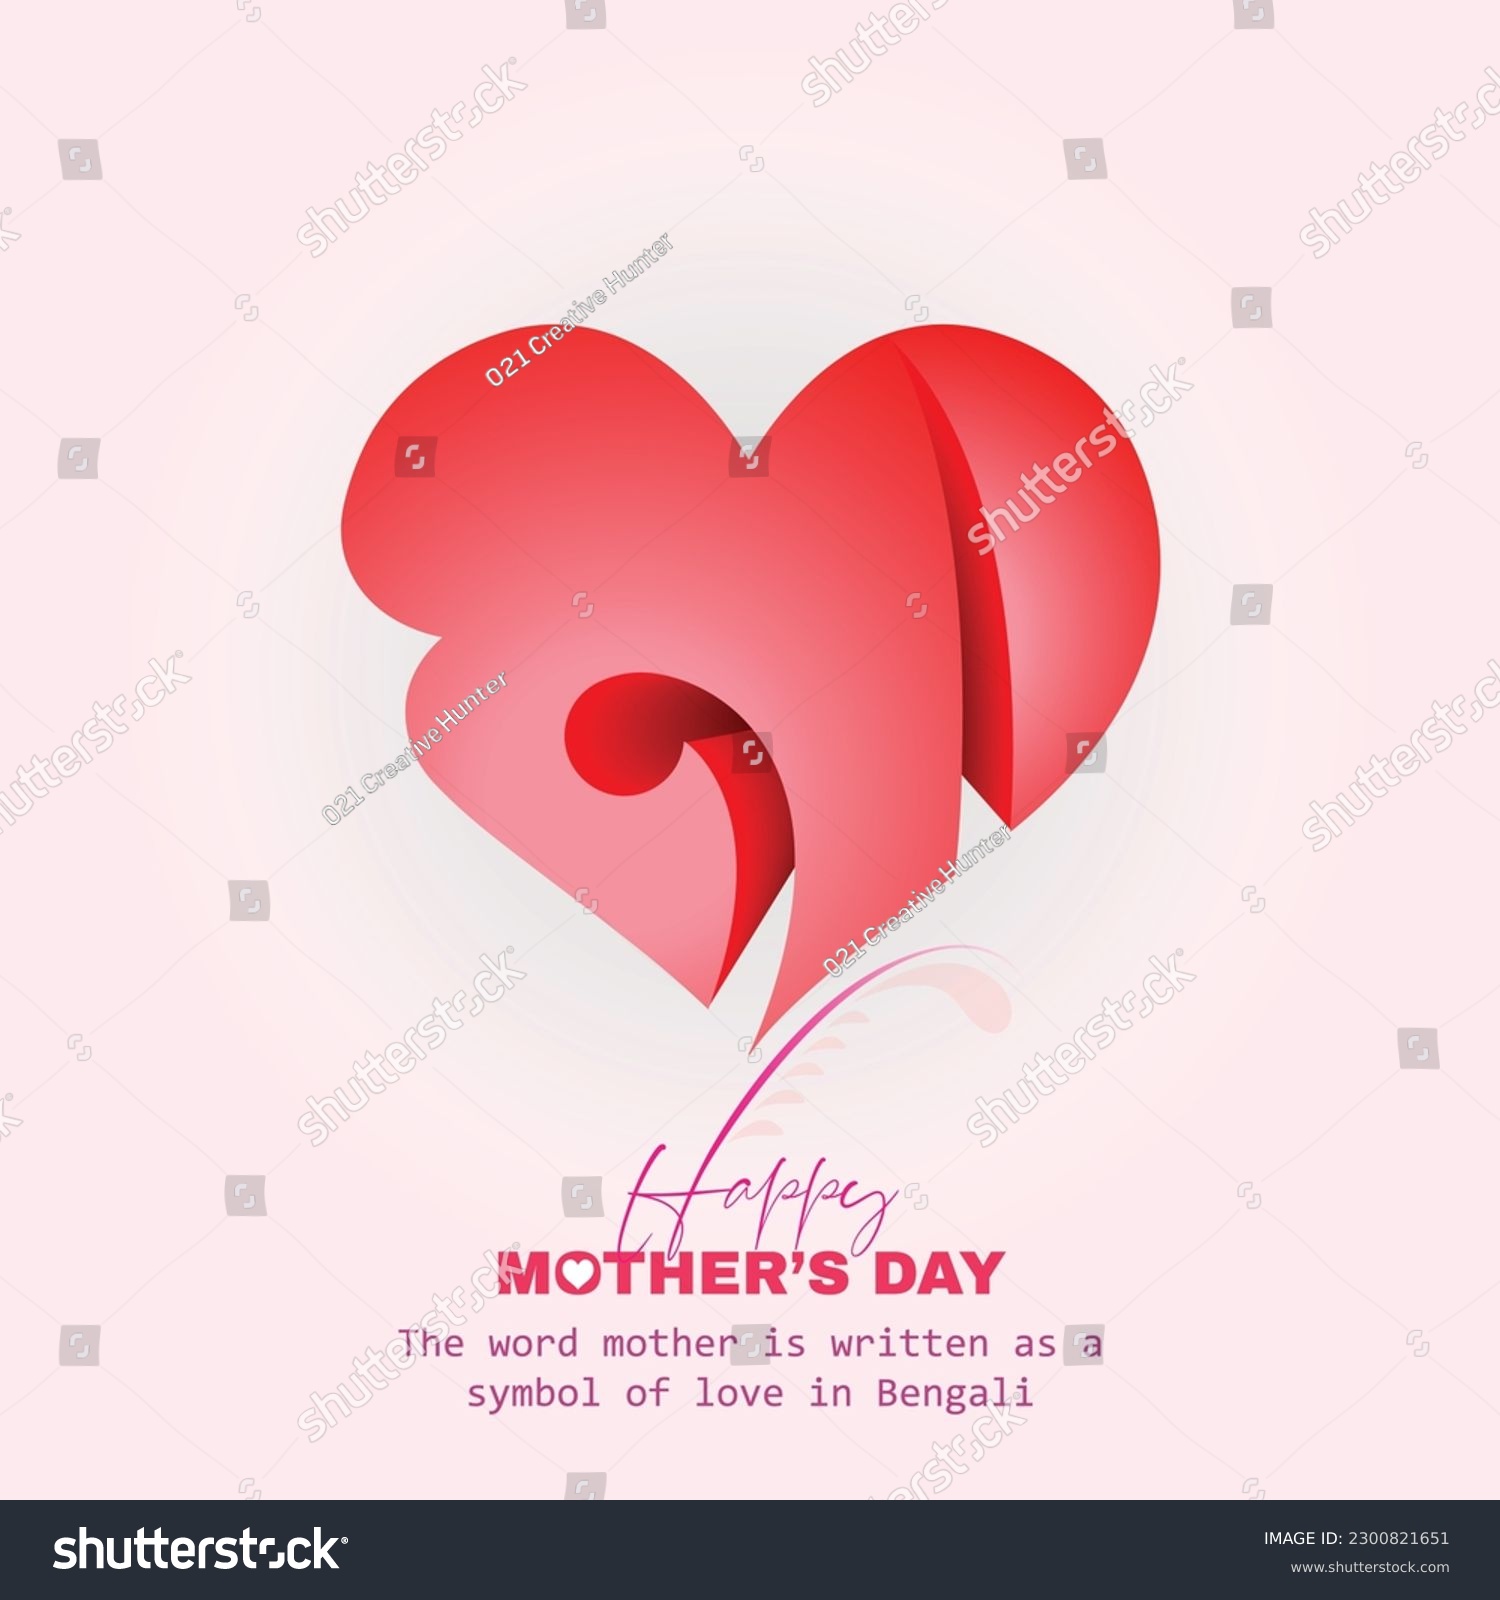 SVG of The word mother is written as a symbol of love in Bengali. Mother-Bengali text Maa Typography, Calligraphy in 3d illustration, 3d Rendering. Happy Mother's Day. Mom forever. Symbols of love. Vector. svg